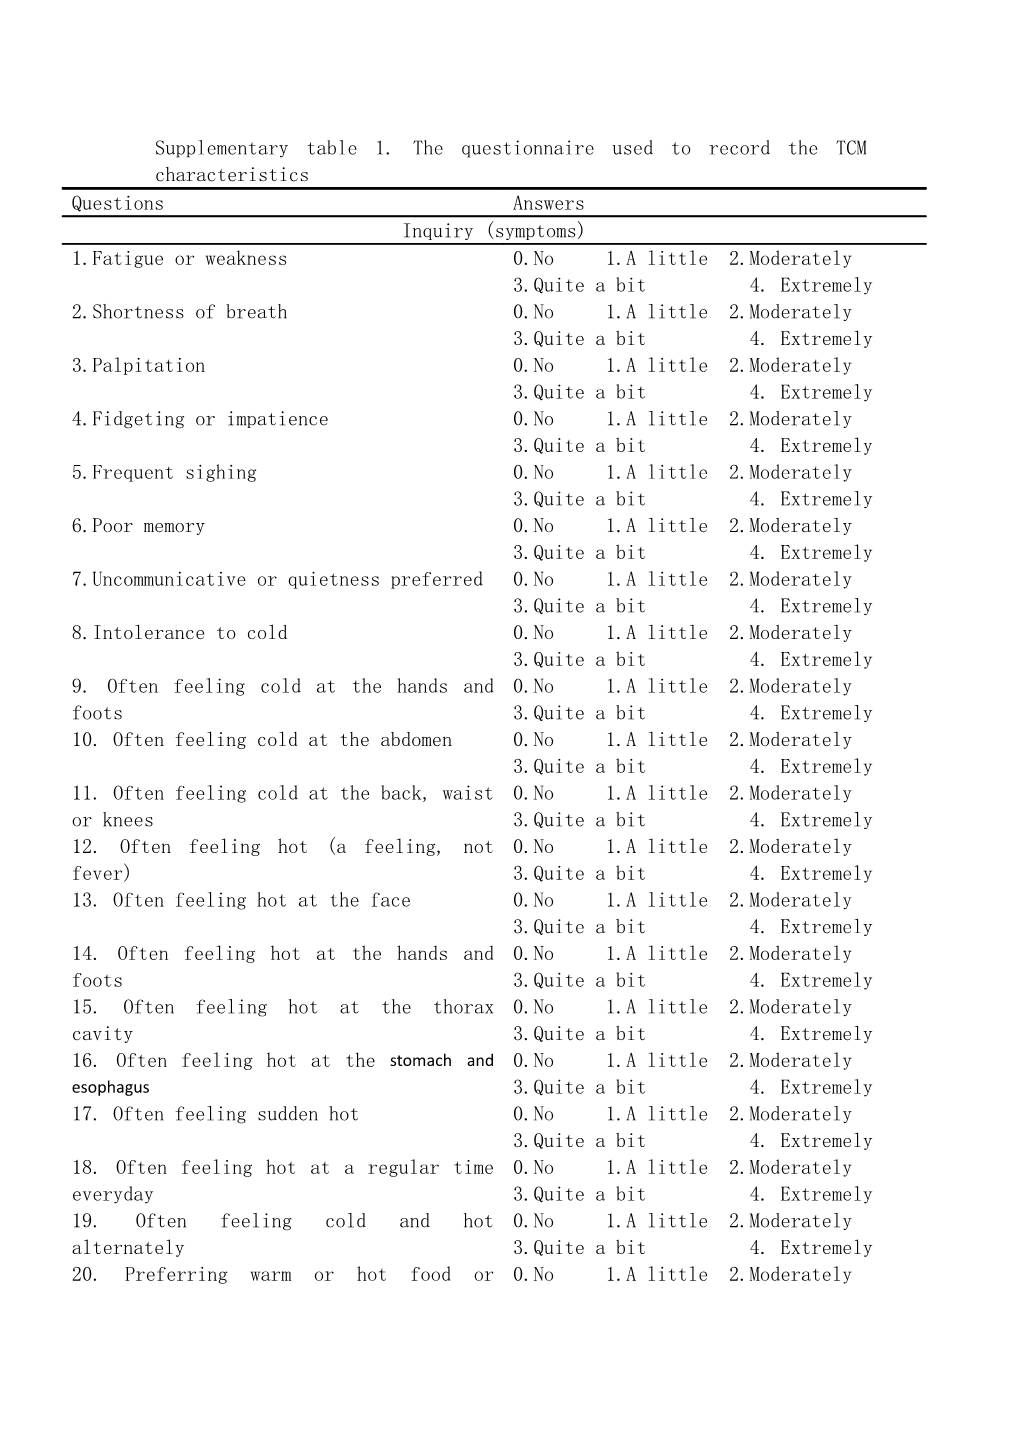 Supplementary Table 1. the Questionnaire Used to Record the TCM Characteristics